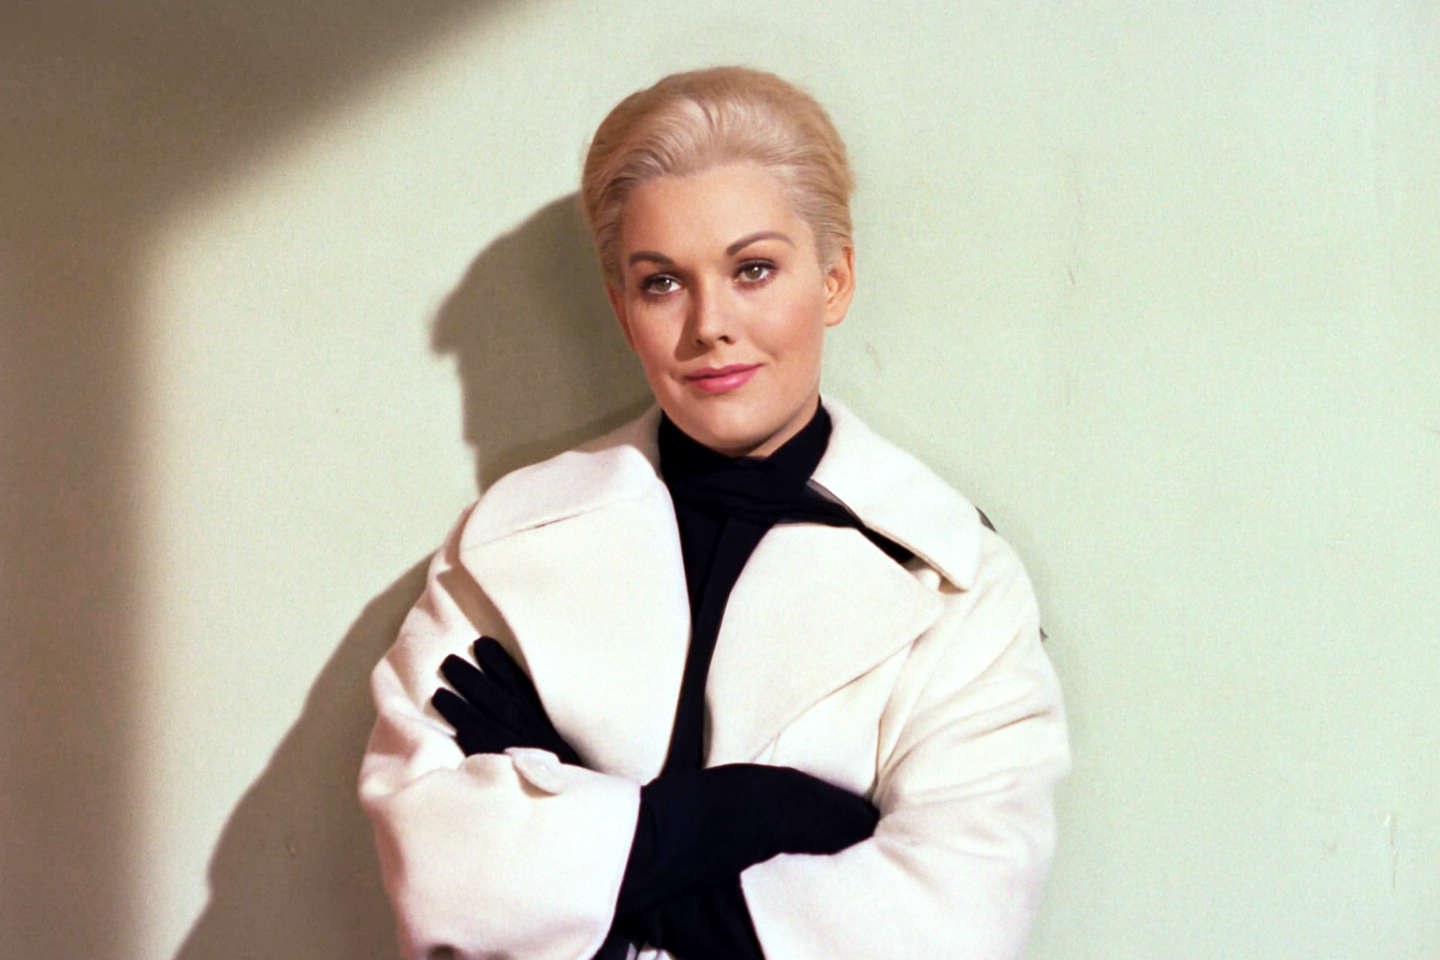 “Kim Novak, the rebellious soul of Hollywood”, on Arte: the fights of a free star with a strong character